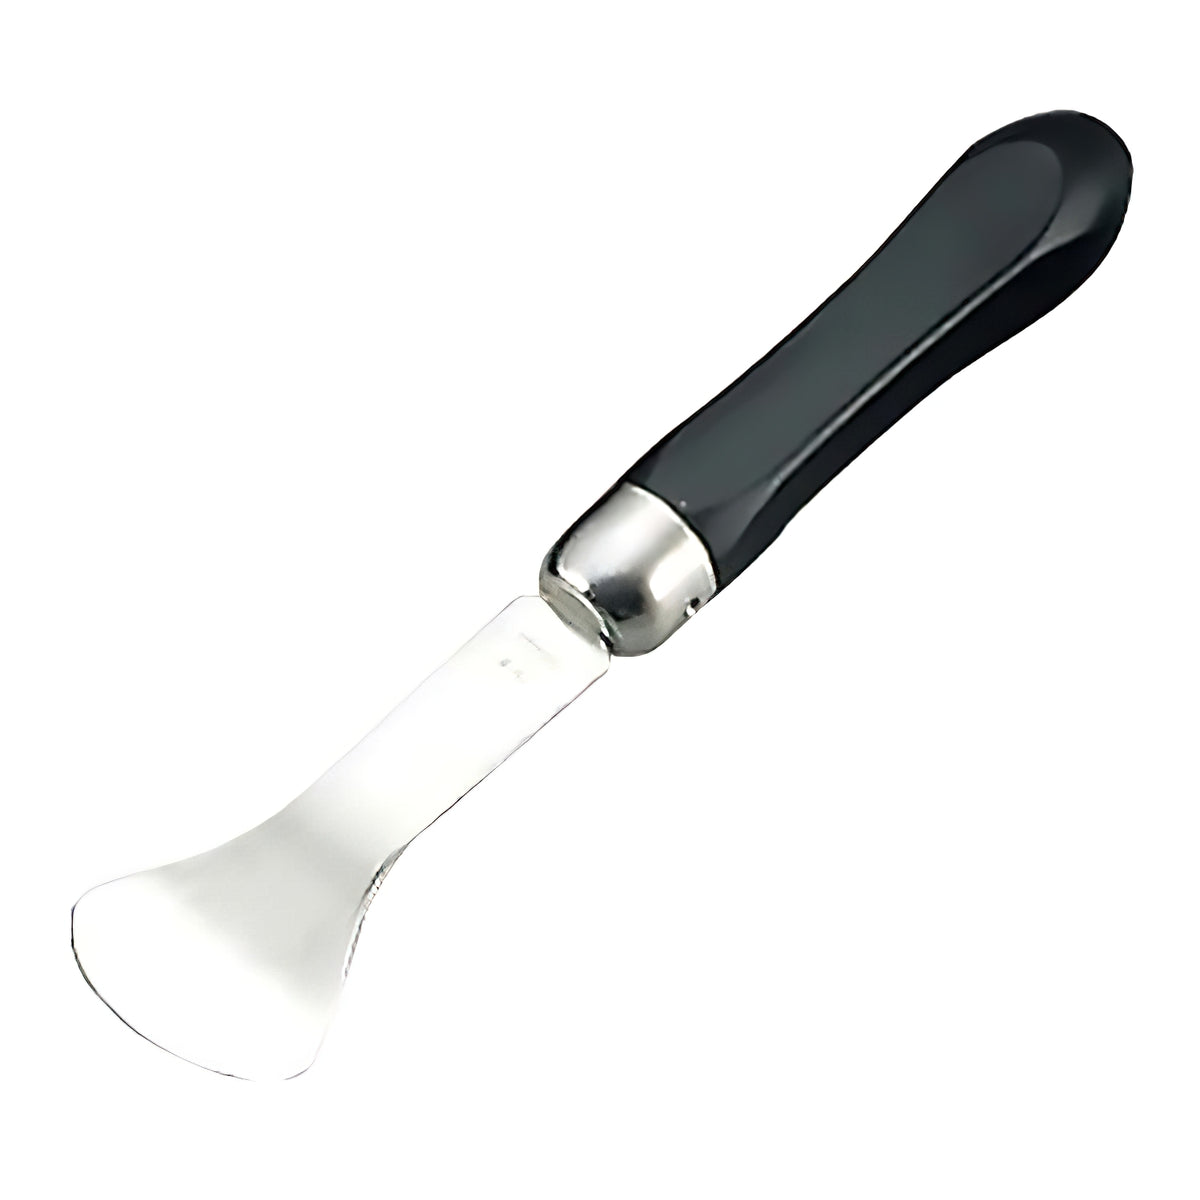 EBM Stainless Steel Scallop Knife